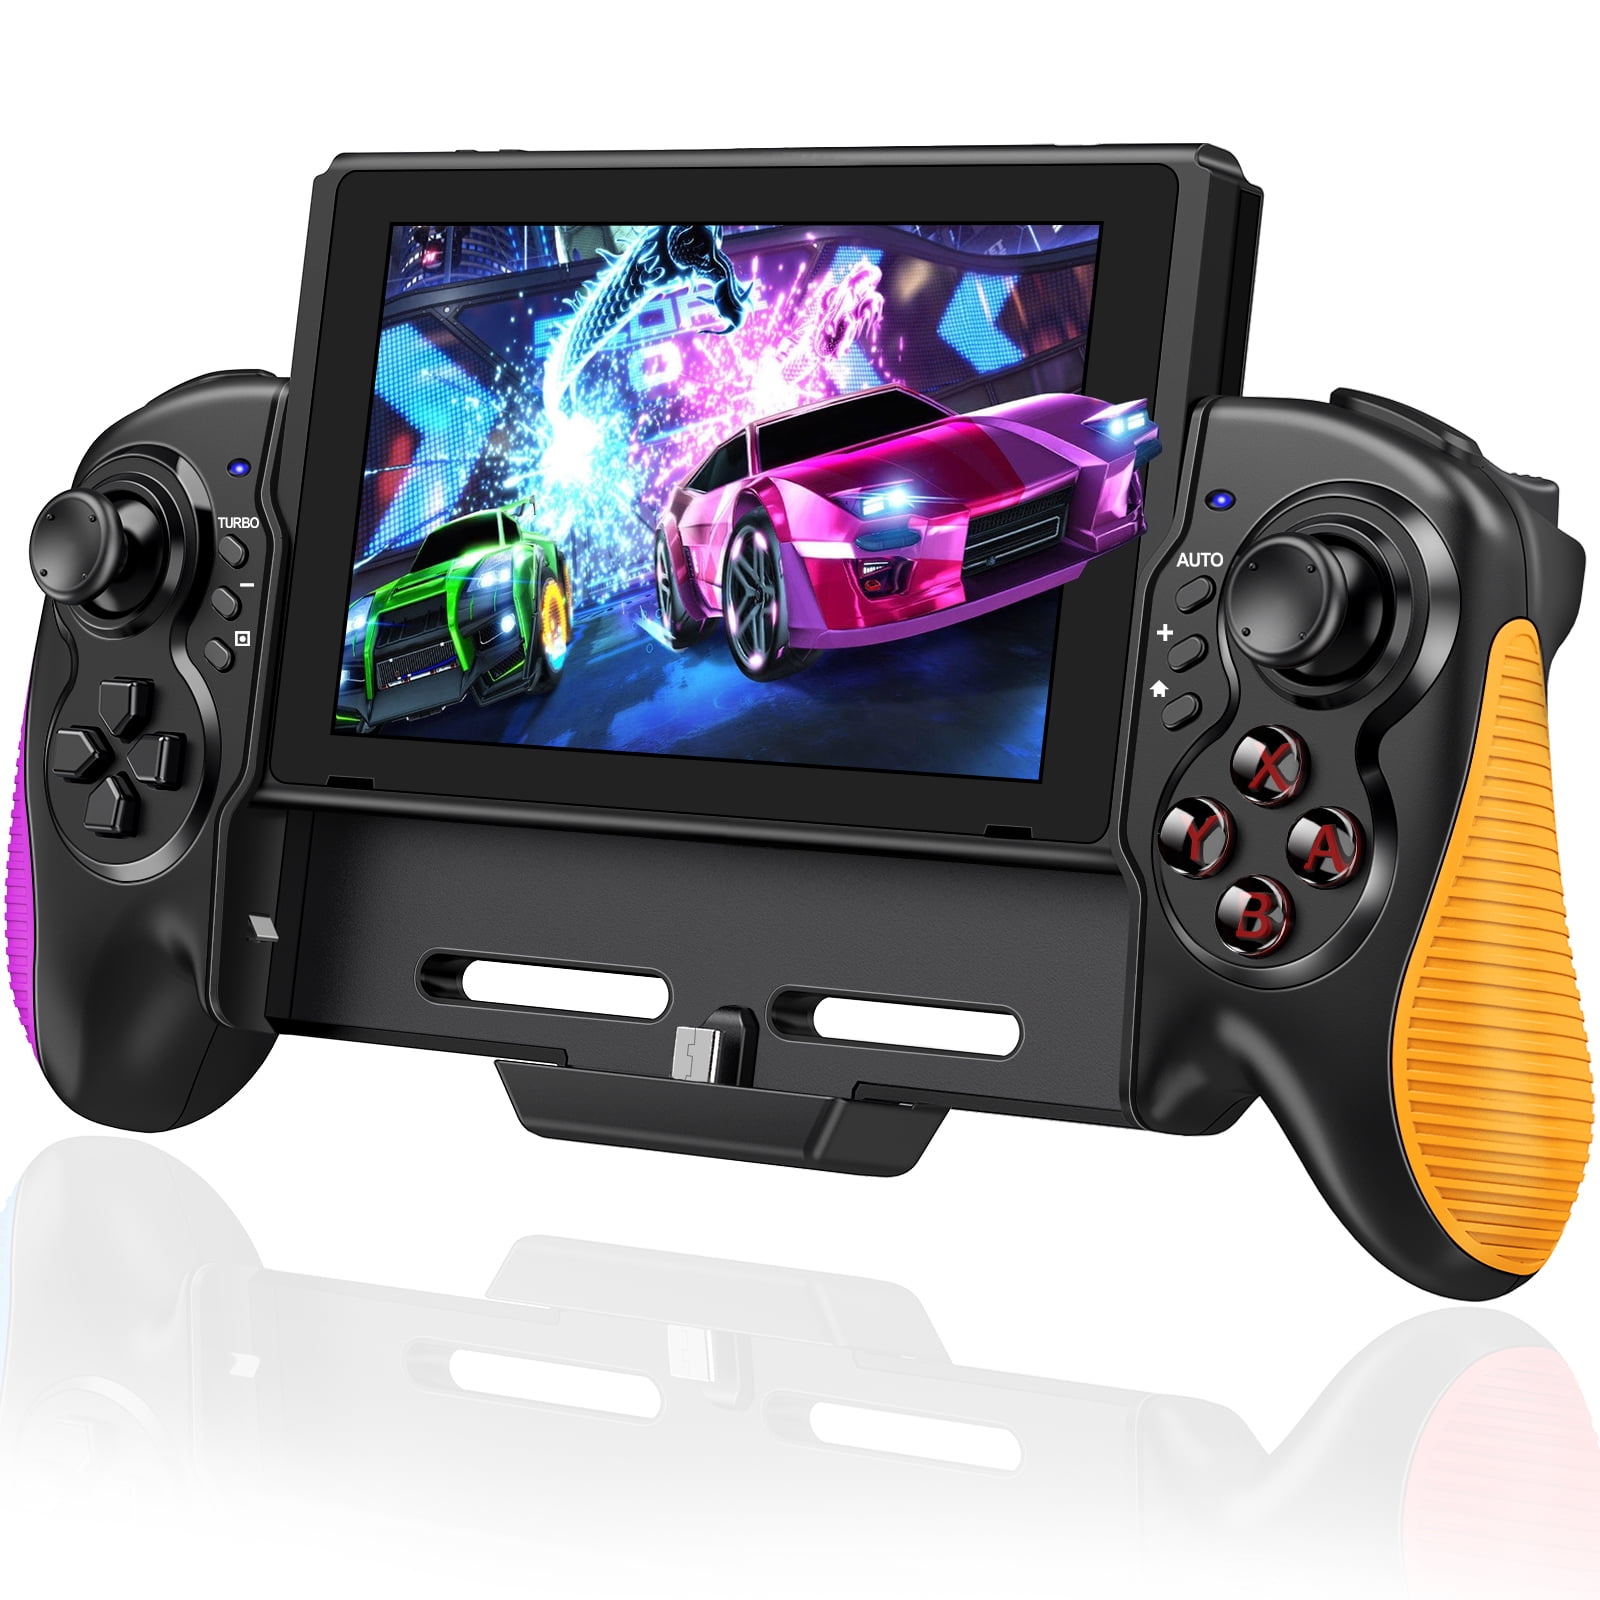 Switch Controller for Nintendo Switch/OLED,ESYWEN Switch Joy-Con with  Handheld Grip Double Motor Vibration Built-in 6-Axis Gyro  Joystick,Replacement ...